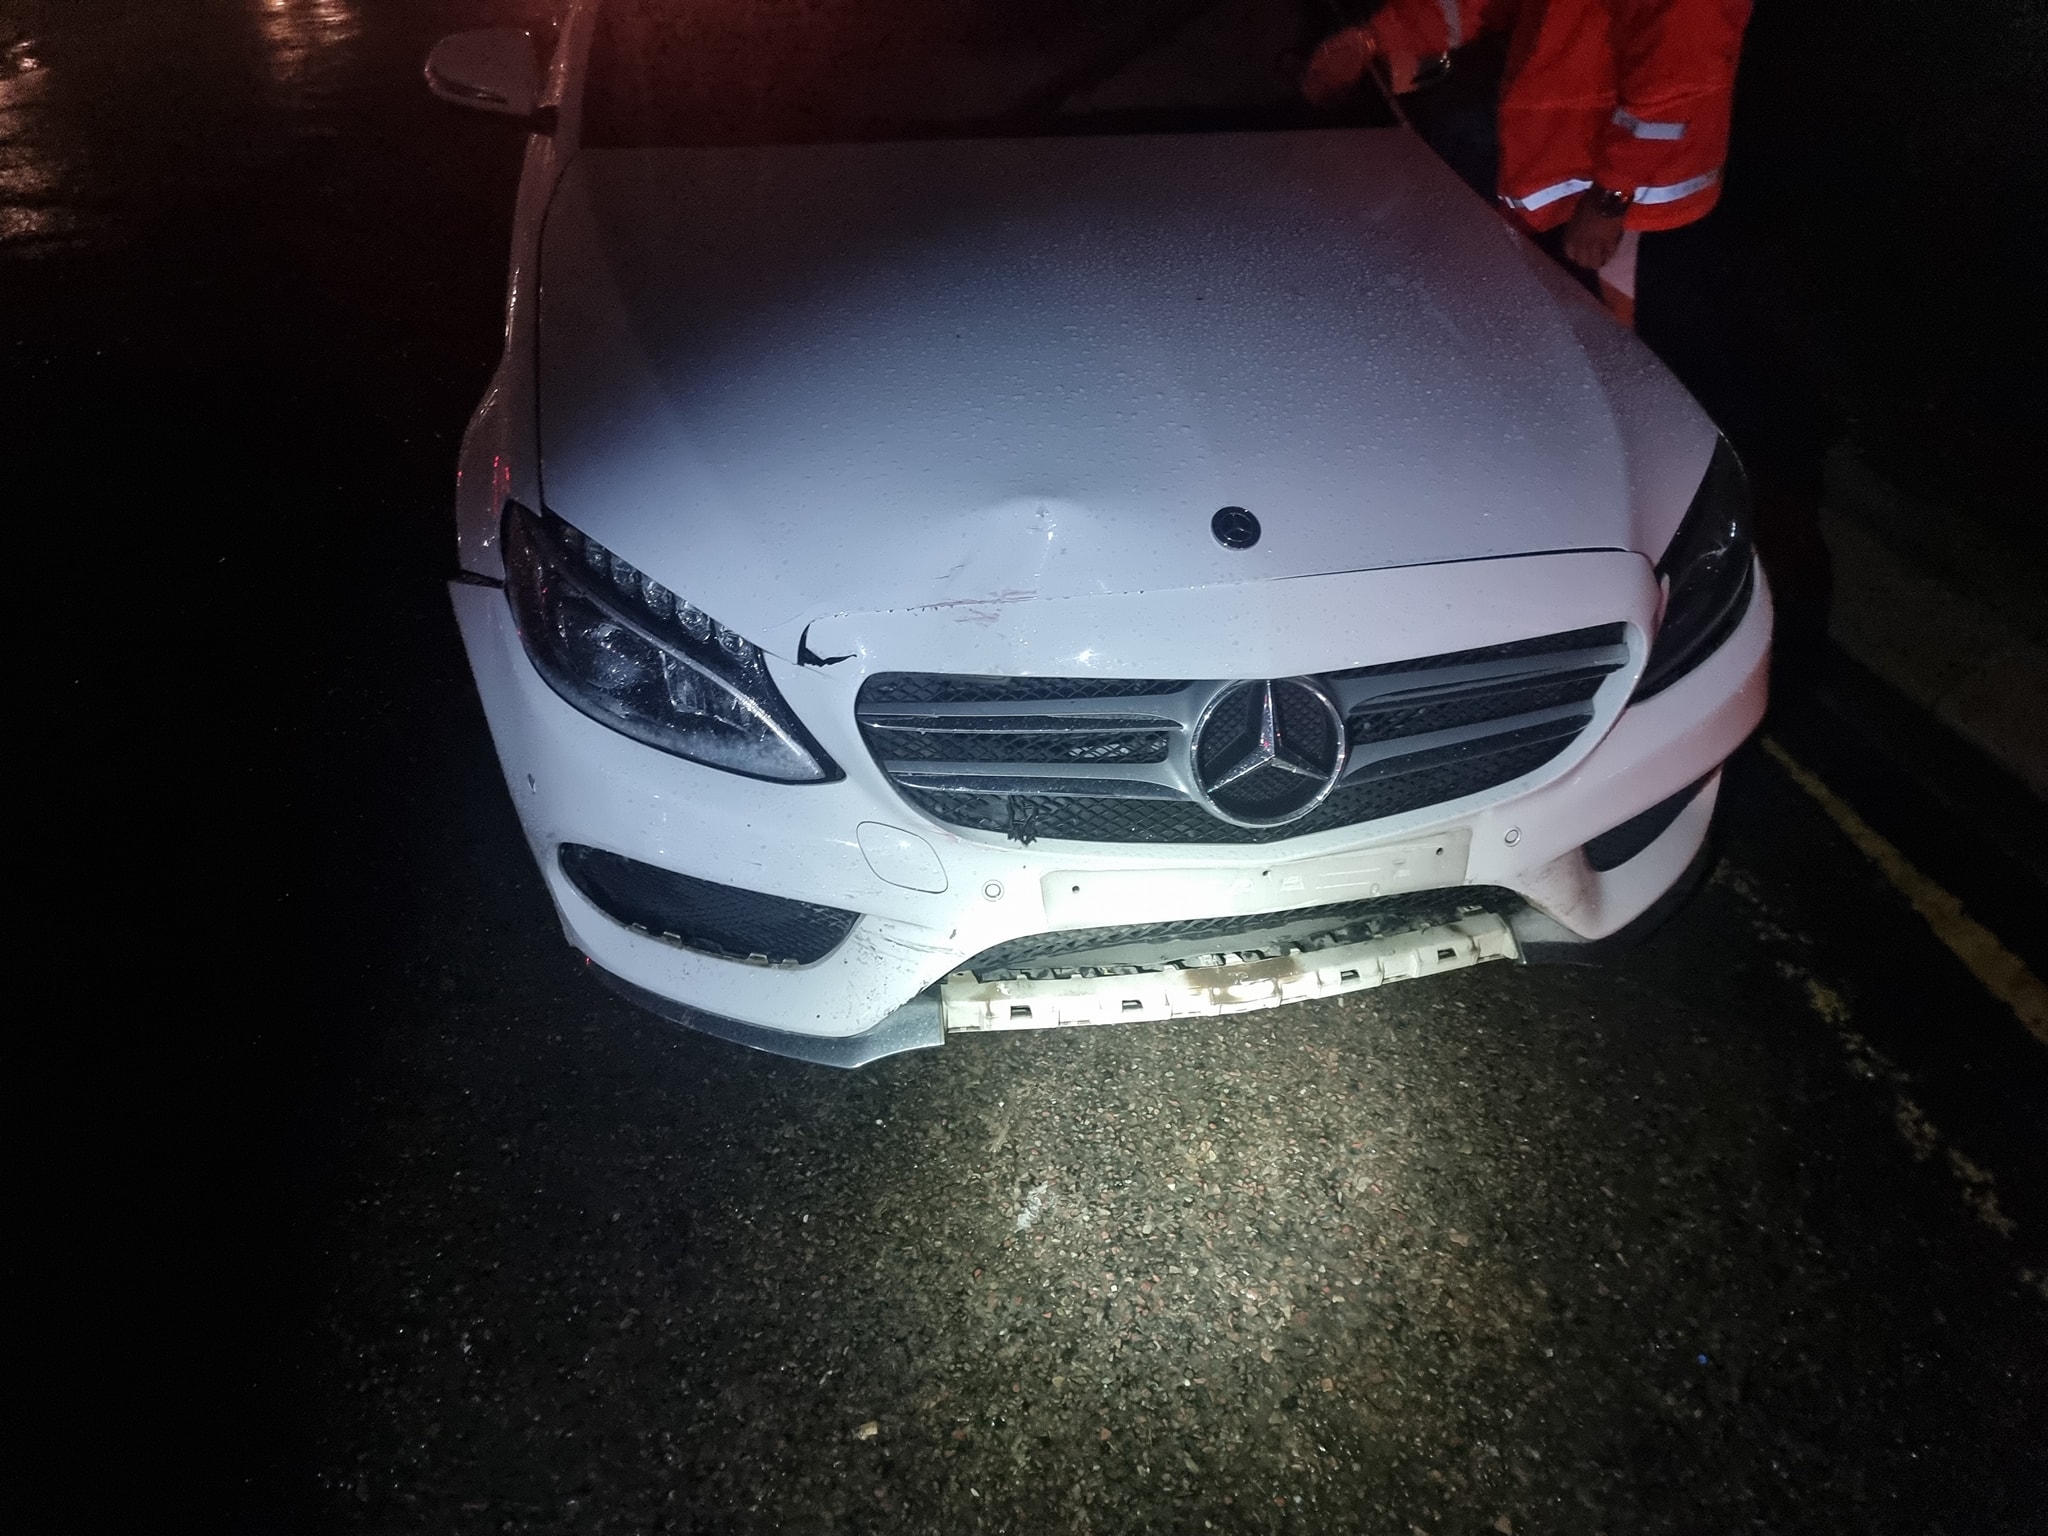 Collision involving two vehicles in Roodepoort